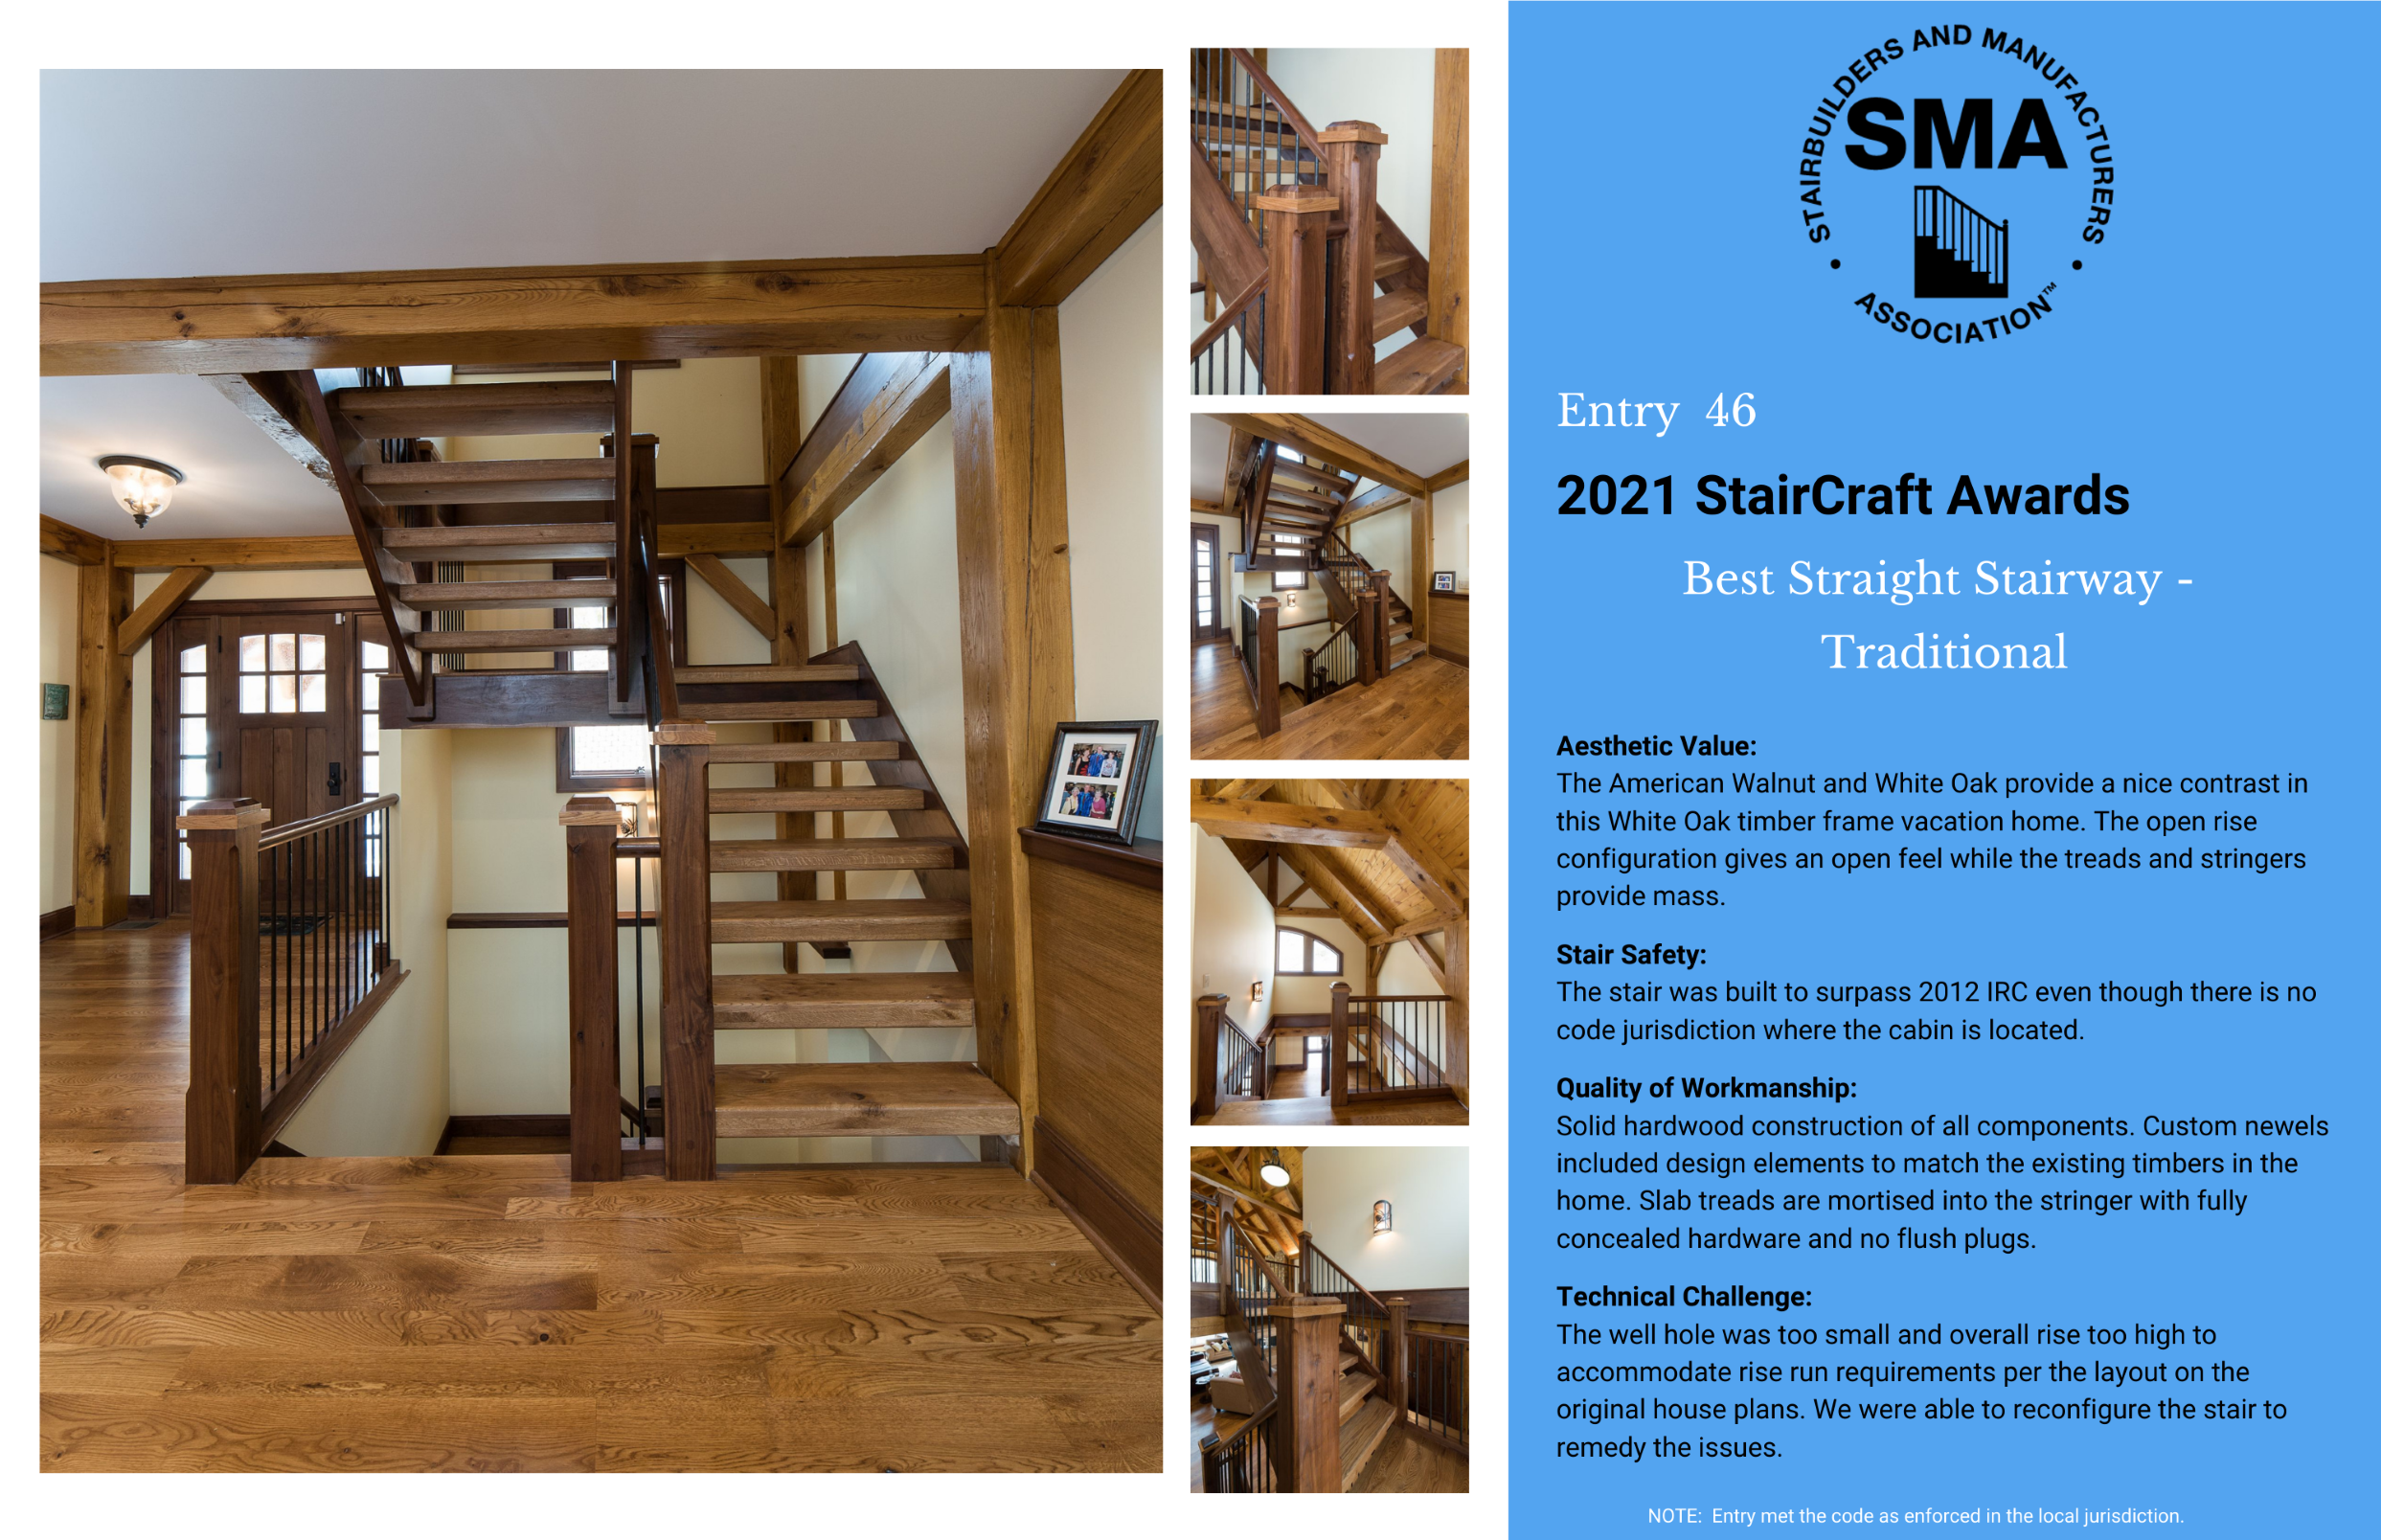 2021 StairCraft Awards Entry 46